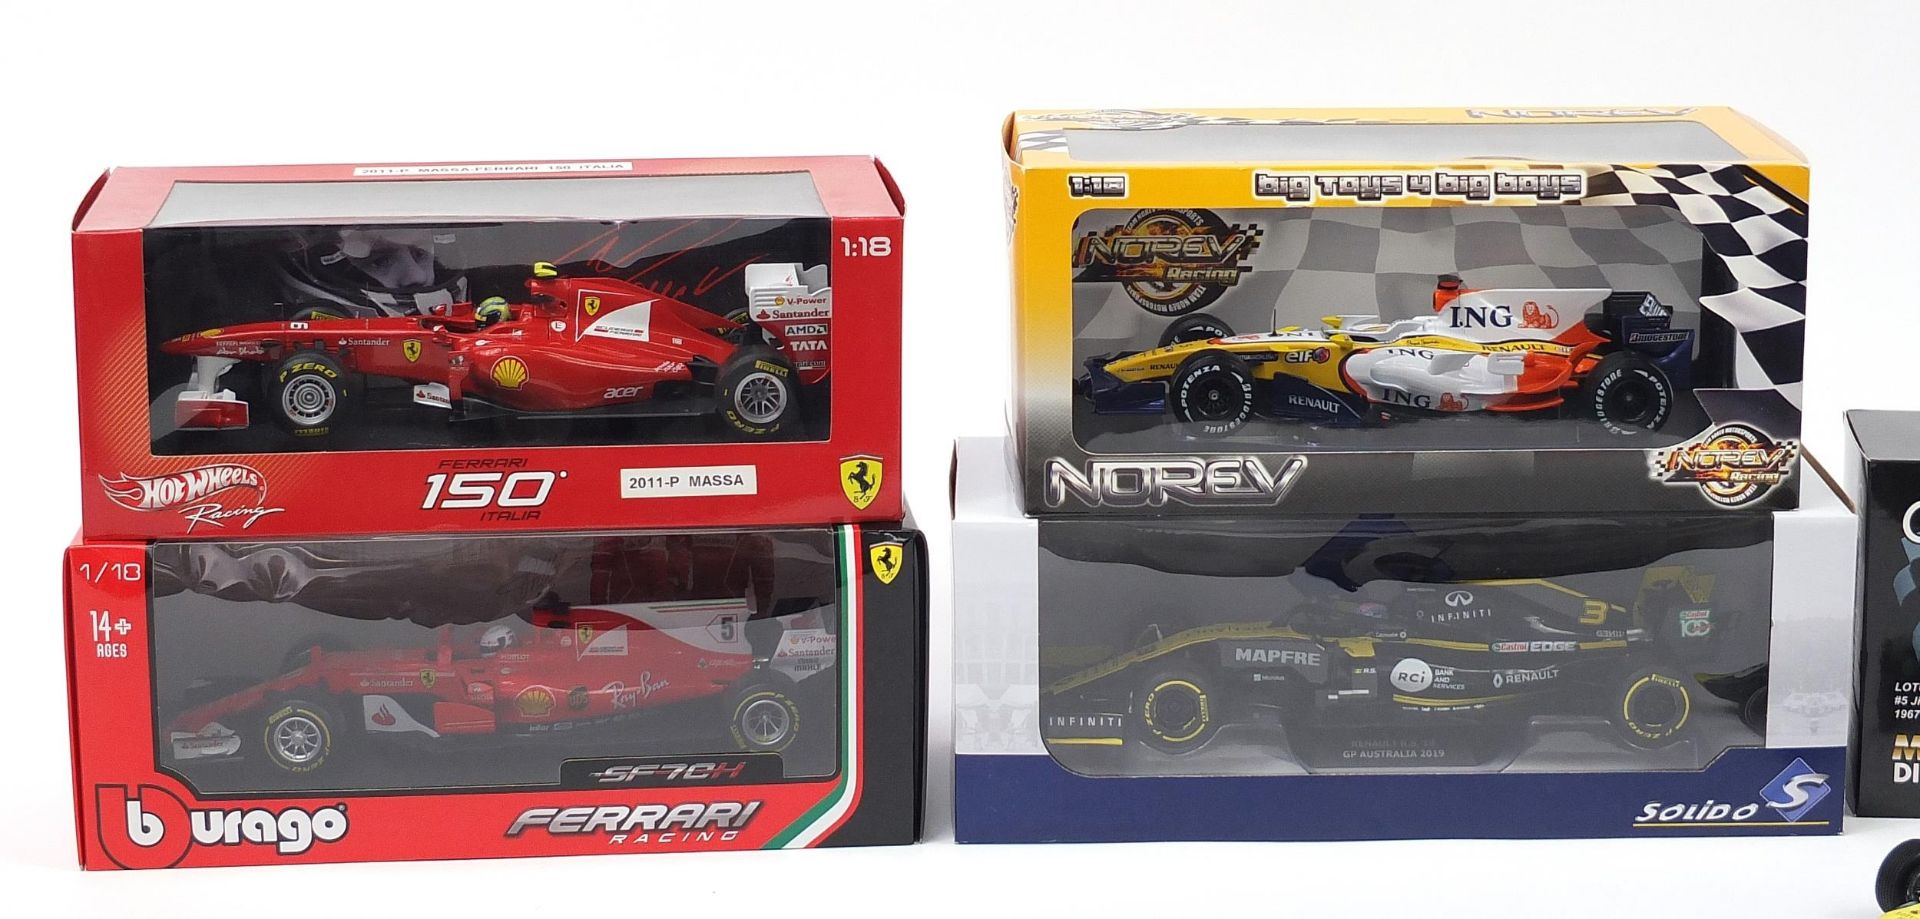 Five 1/18th scale F1 racing vehicles including Sebastian Vettel Virago and Hot Wheels racing - Image 2 of 3